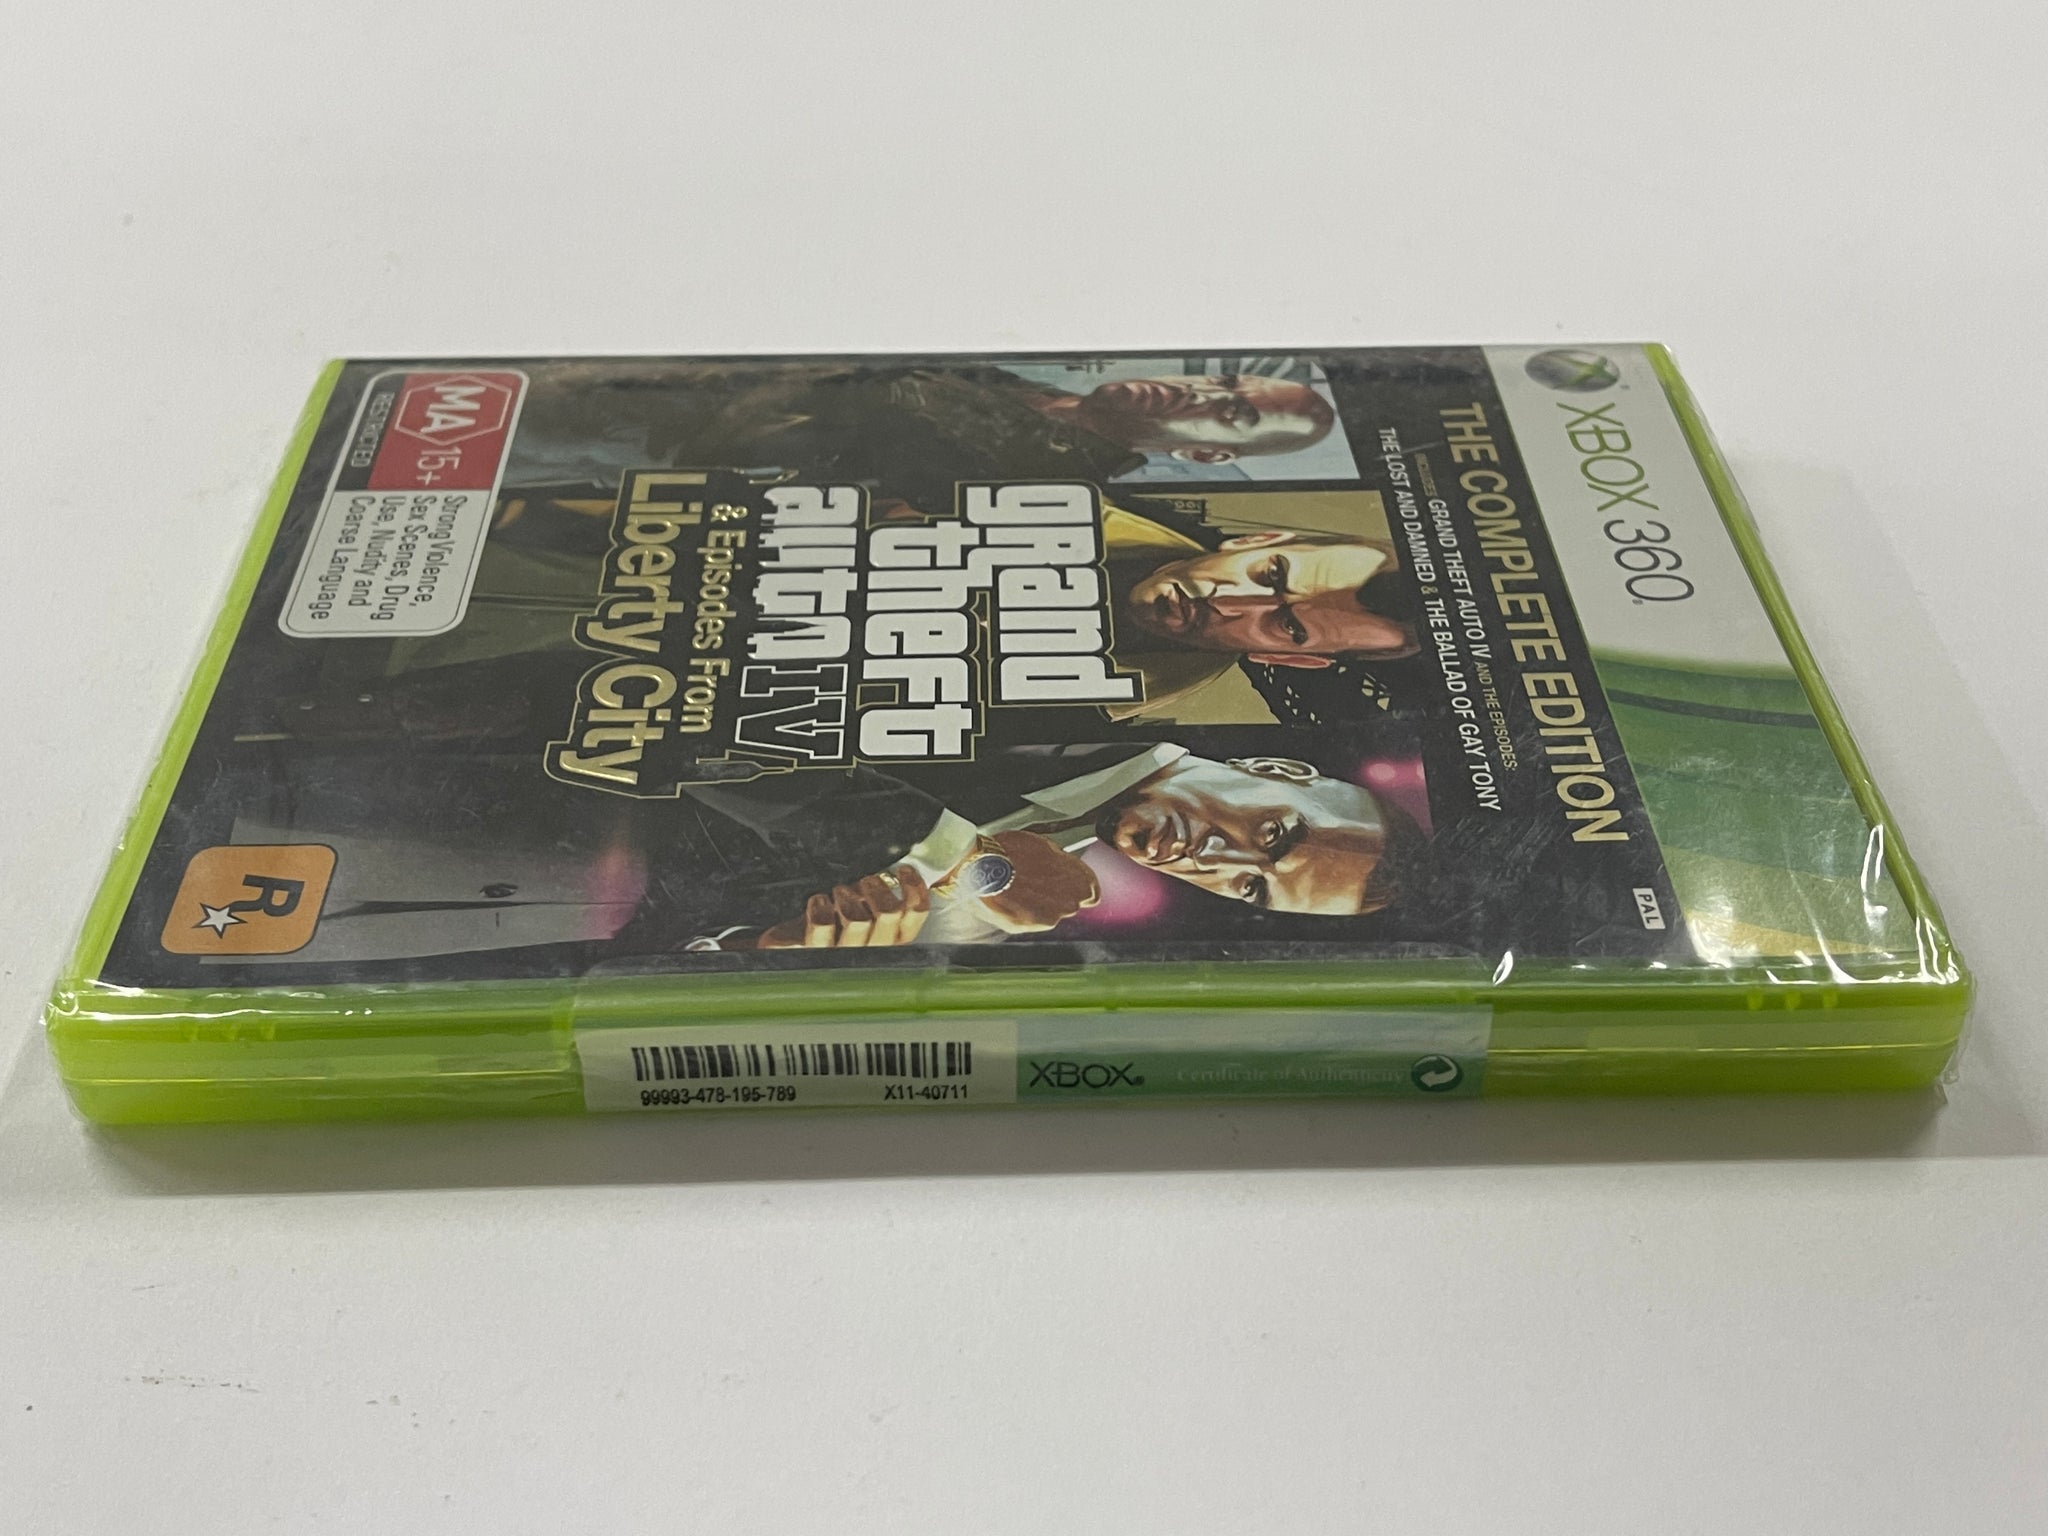 Xbox 360 - Grand Theft Auto IV Complete Edition (Game & Episodes